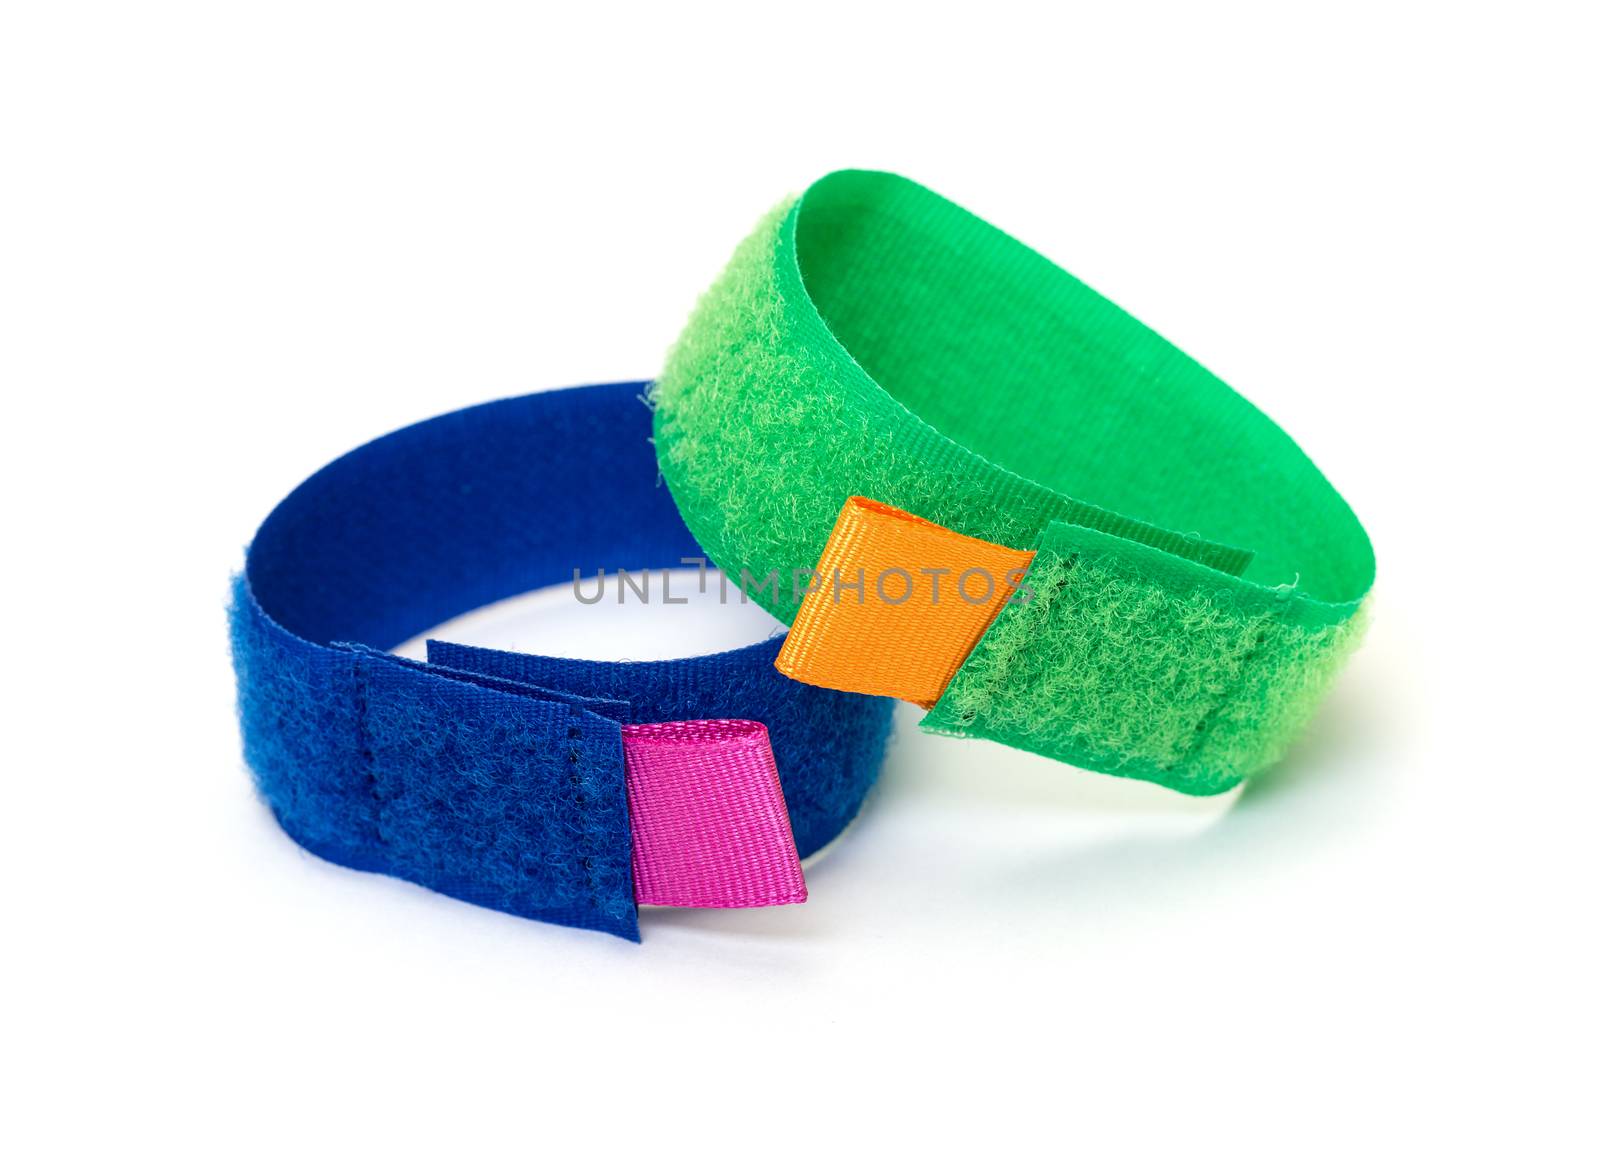 Rings from Colorful Velcro Strips by Discovod